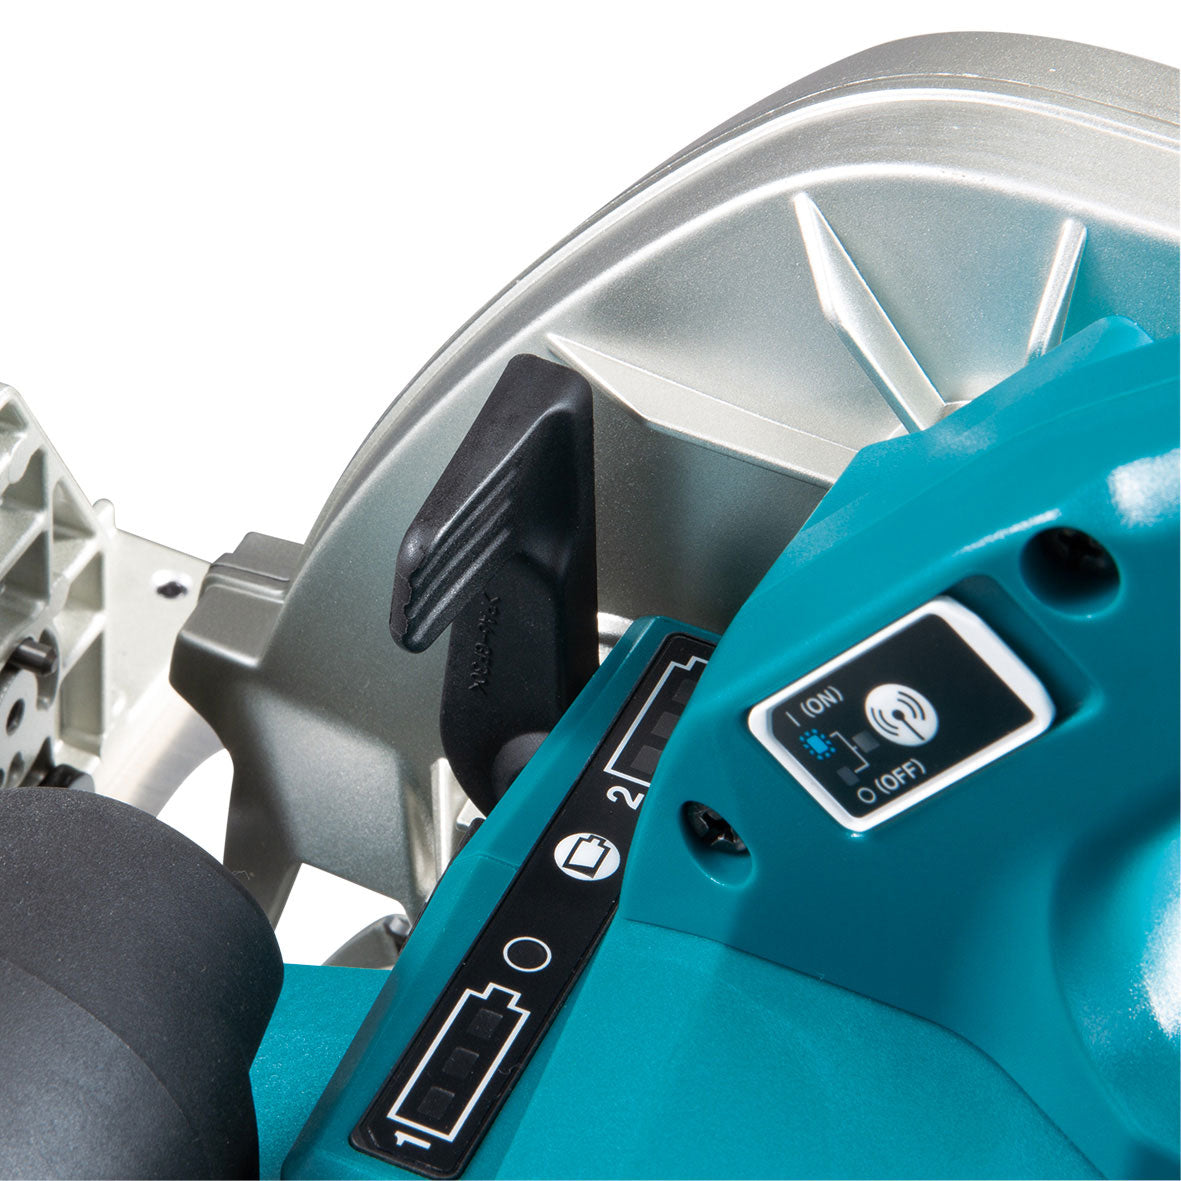 18Vx2 235mm (9-1/4") Brushless Circular Saw Bare (Tool Only) DHS901Z by Makita